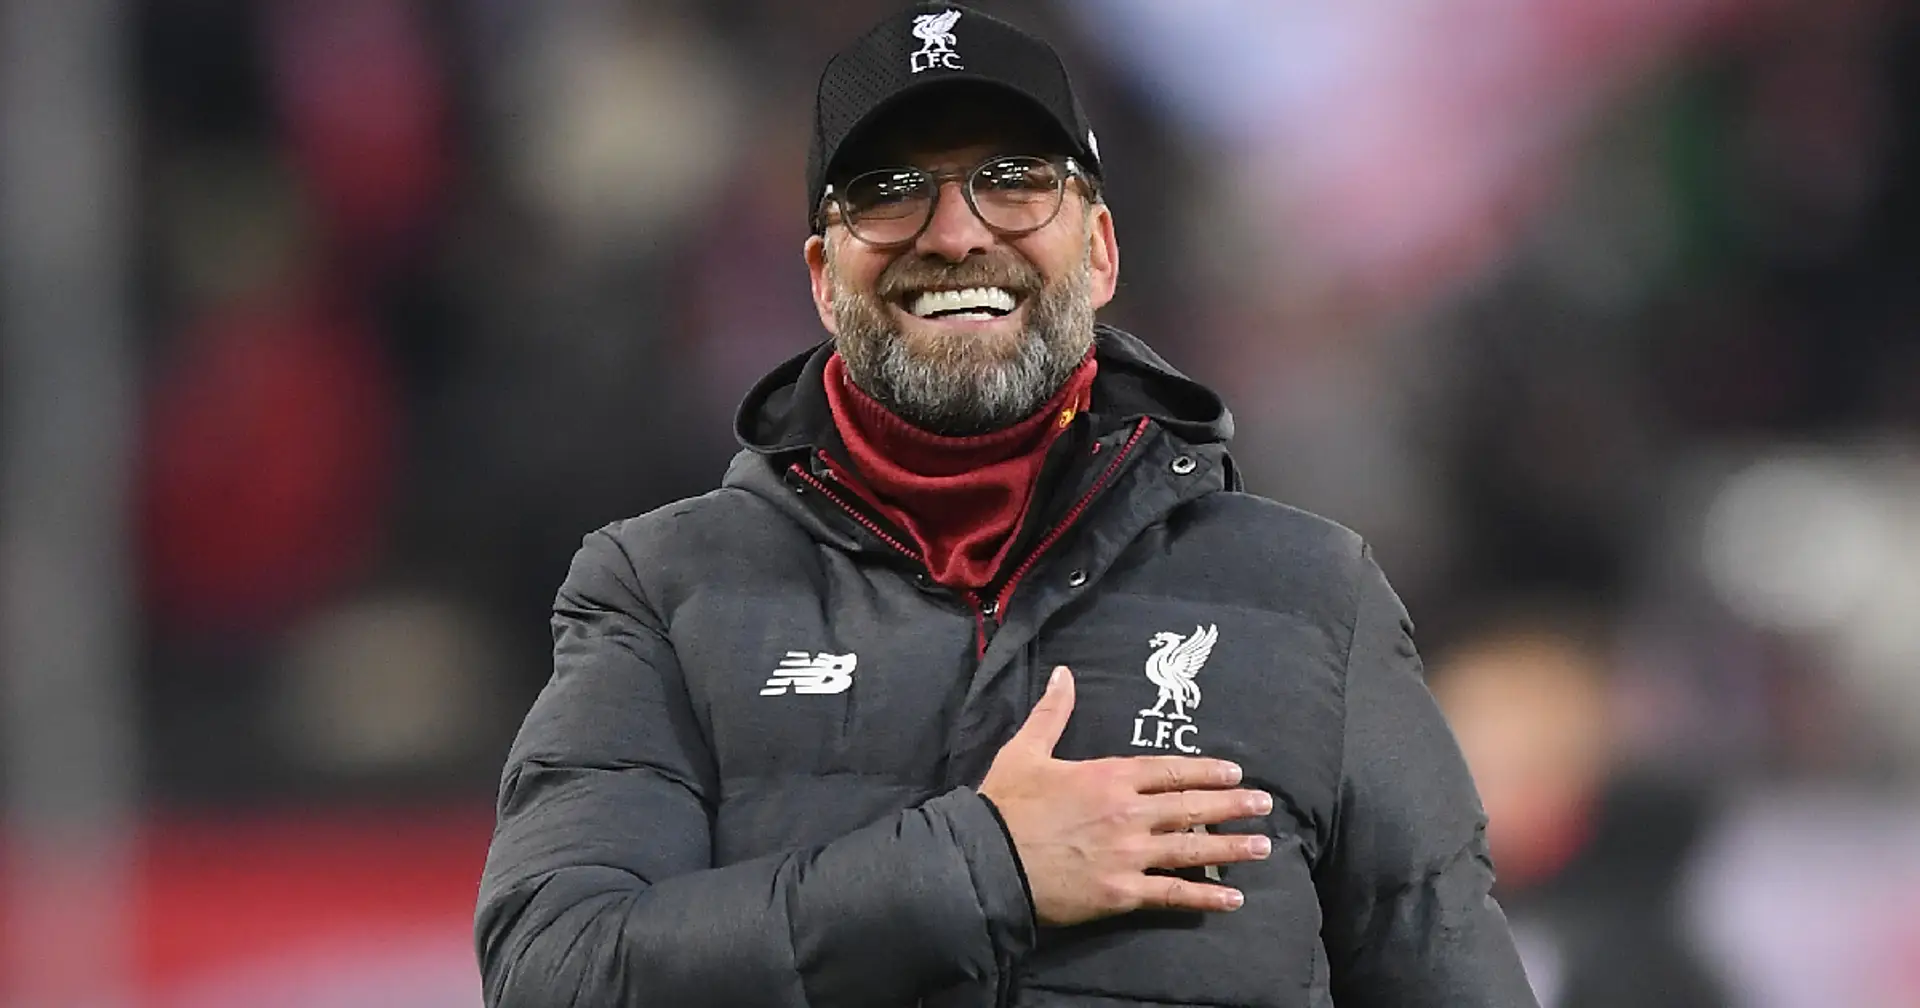 'I think he’s far from finished at Liverpool': German legend Lothar Matthaus on Klopp becoming national team manager